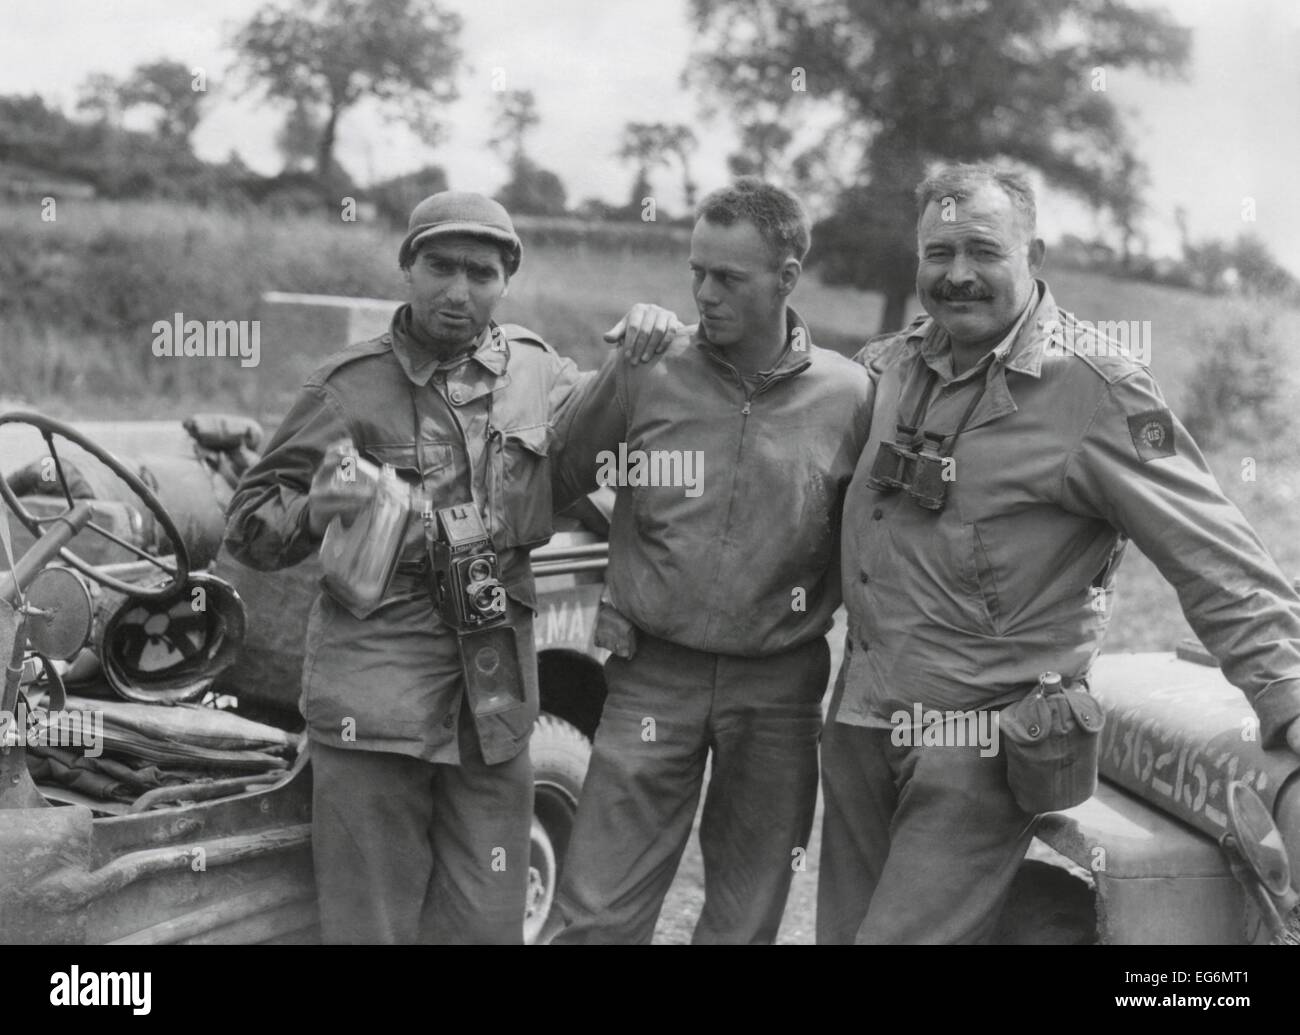 Robert Capa (left) and Ernest Hemingway (right) with their driver U.S. Army driver. They are waiting to follow an American Stock Photo